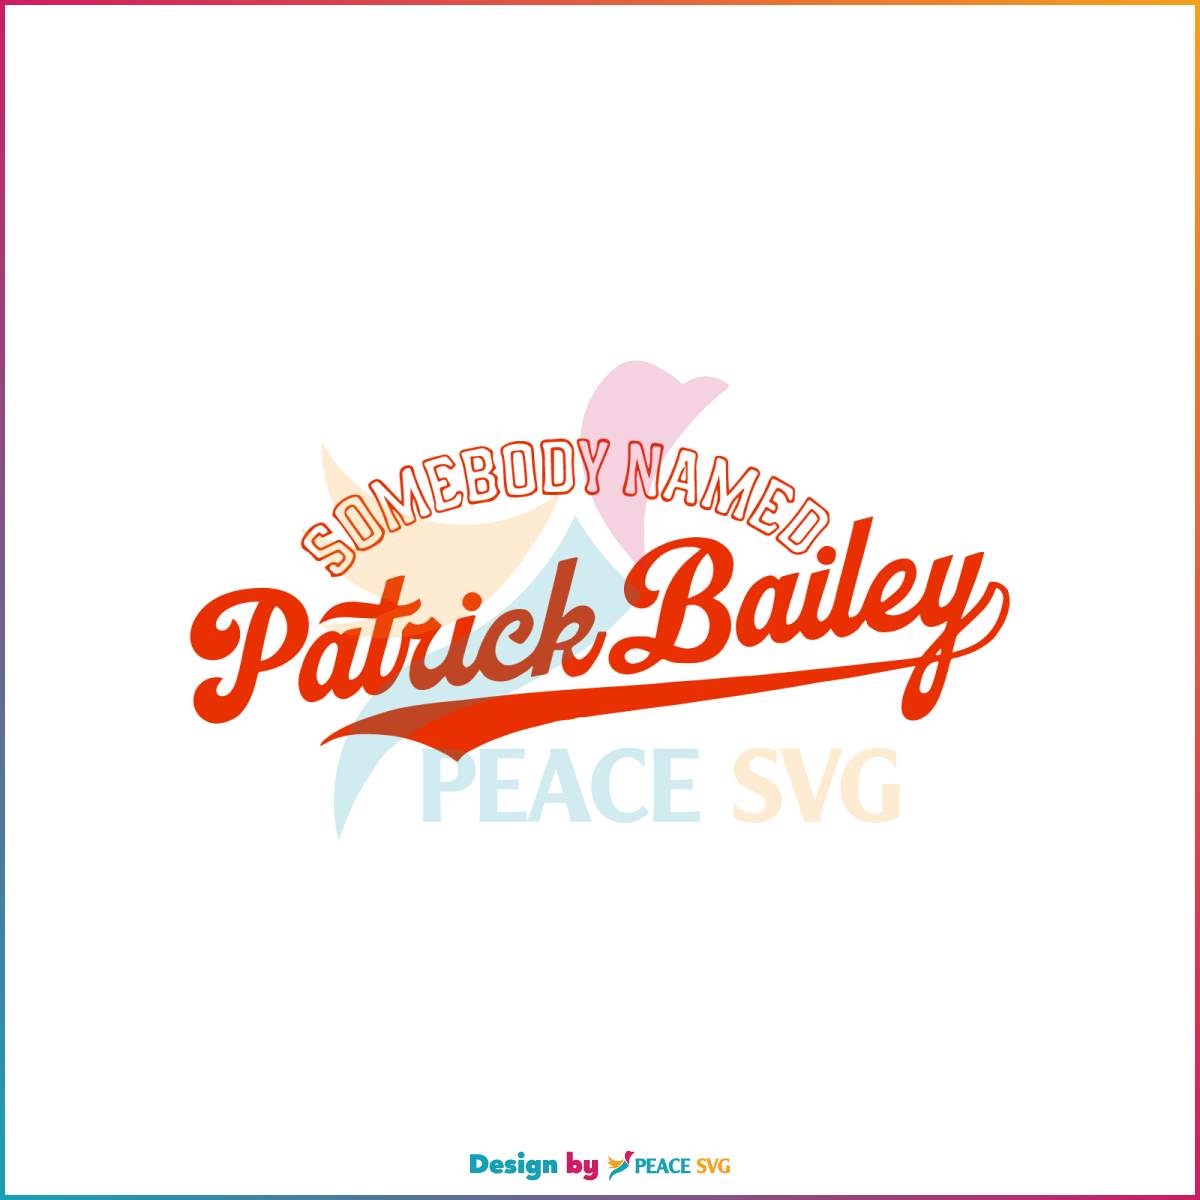 somebody-named-patrick-bailey-svg-silhouette-cricut-files